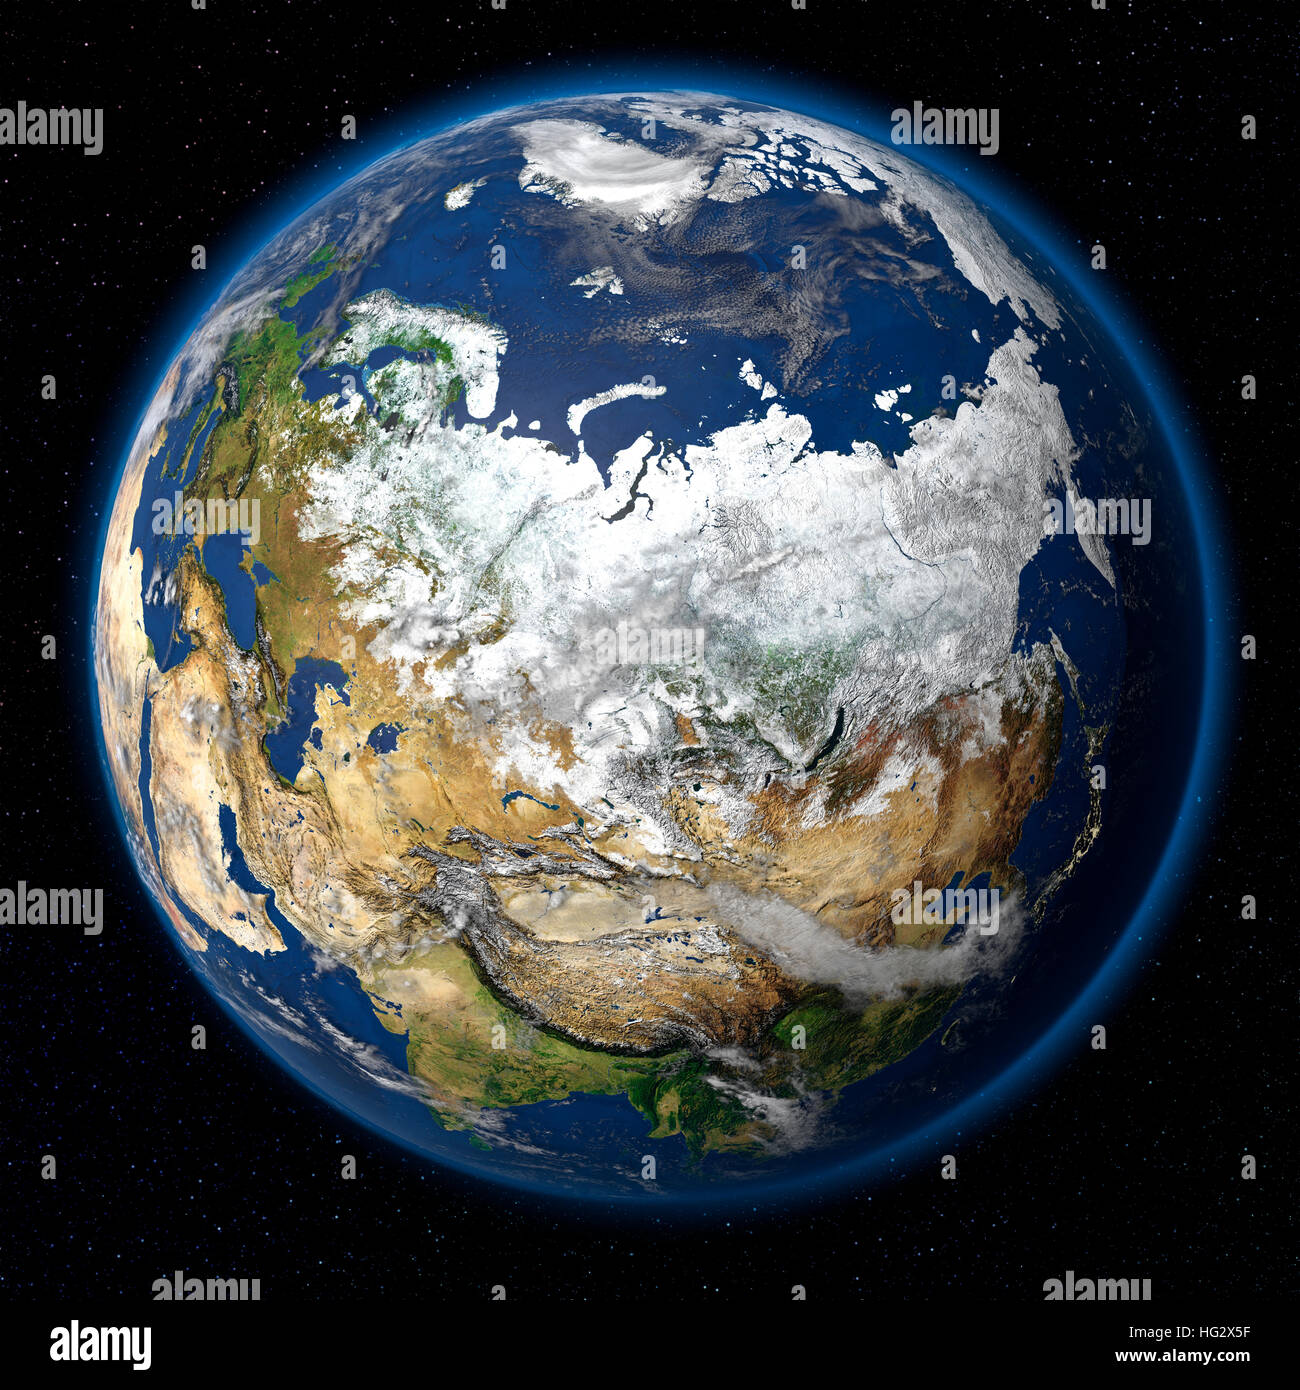 Earth viewed from space showing Russia. Realistic digital illustration including relief map hill shading of terrain. Please credit Nasa. Stock Photo